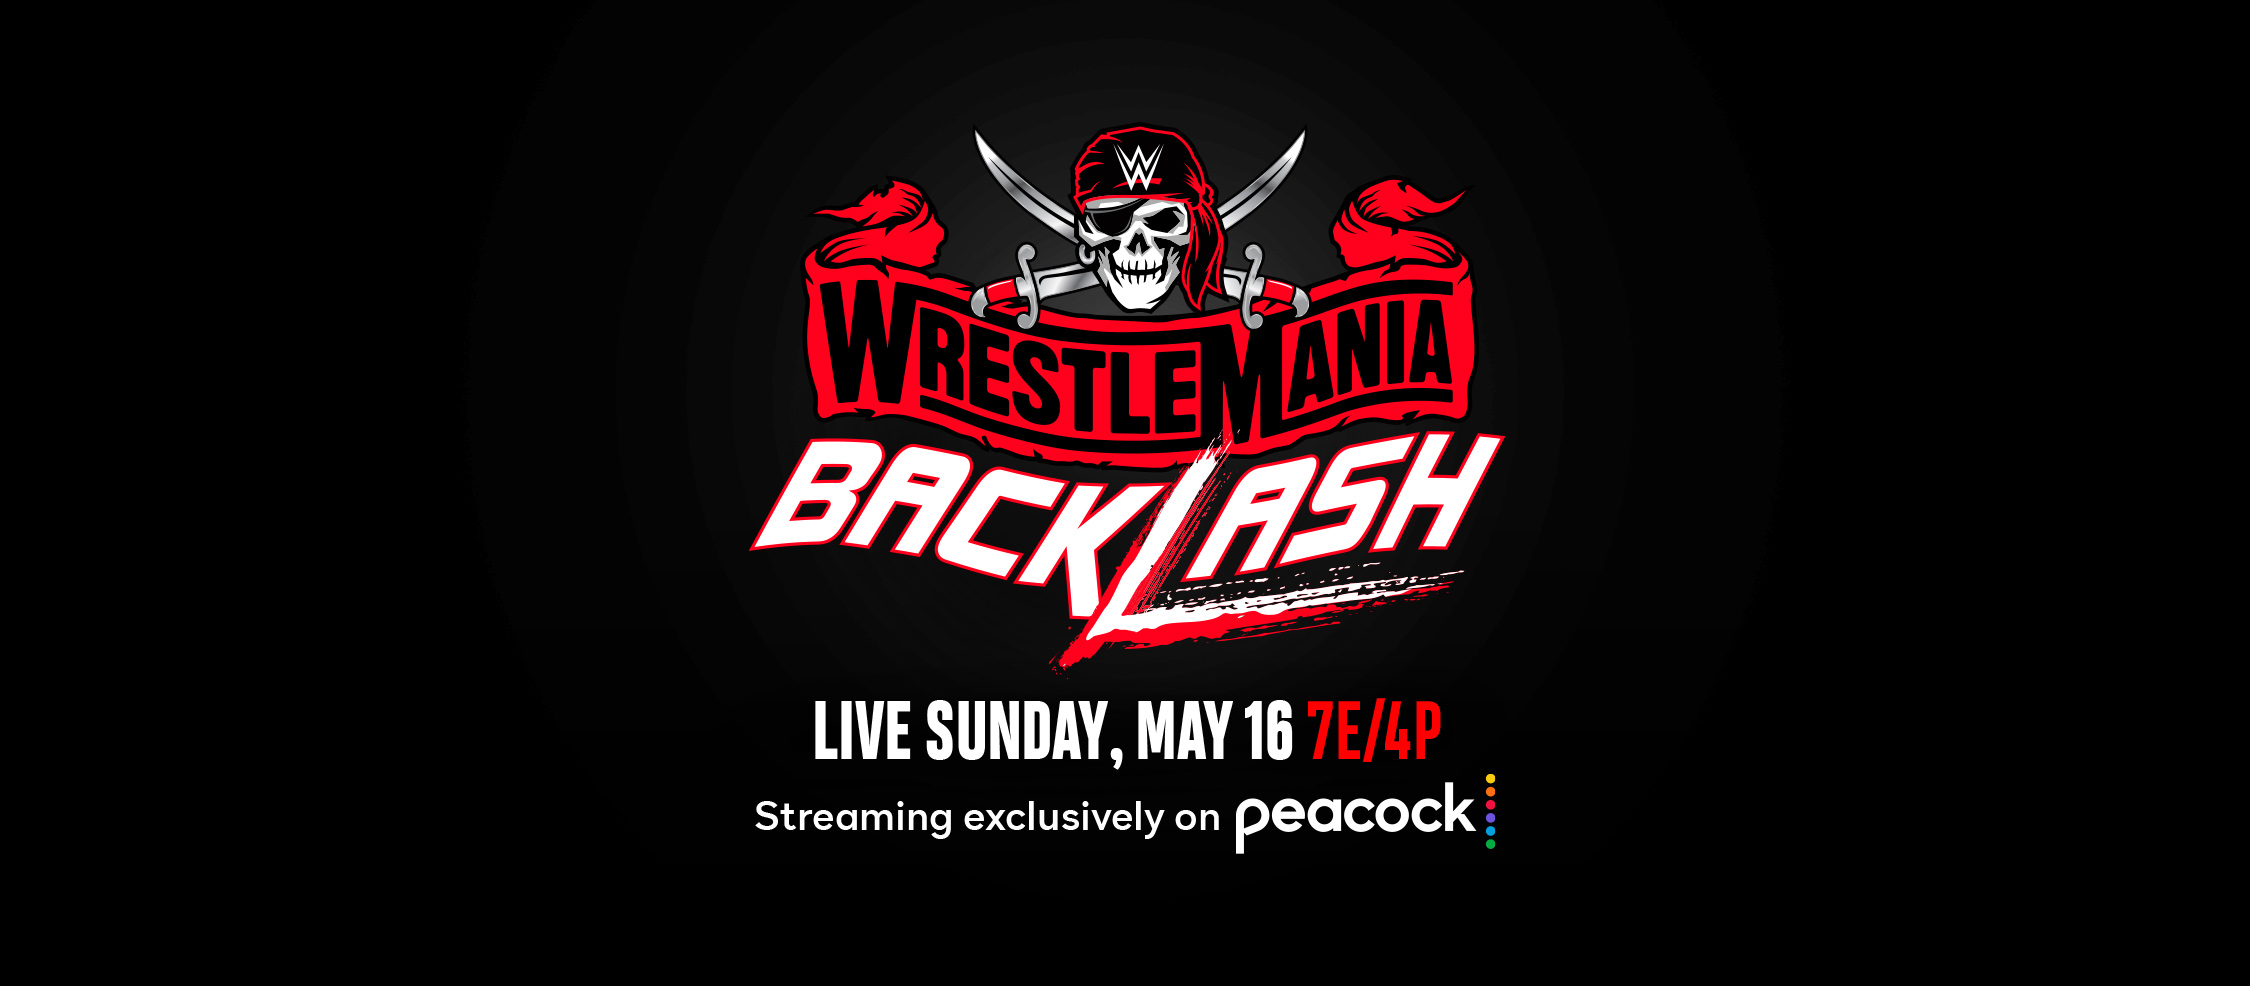 WrestleMania Backlash and WWE's New Marketing Strategy for PPV Titles